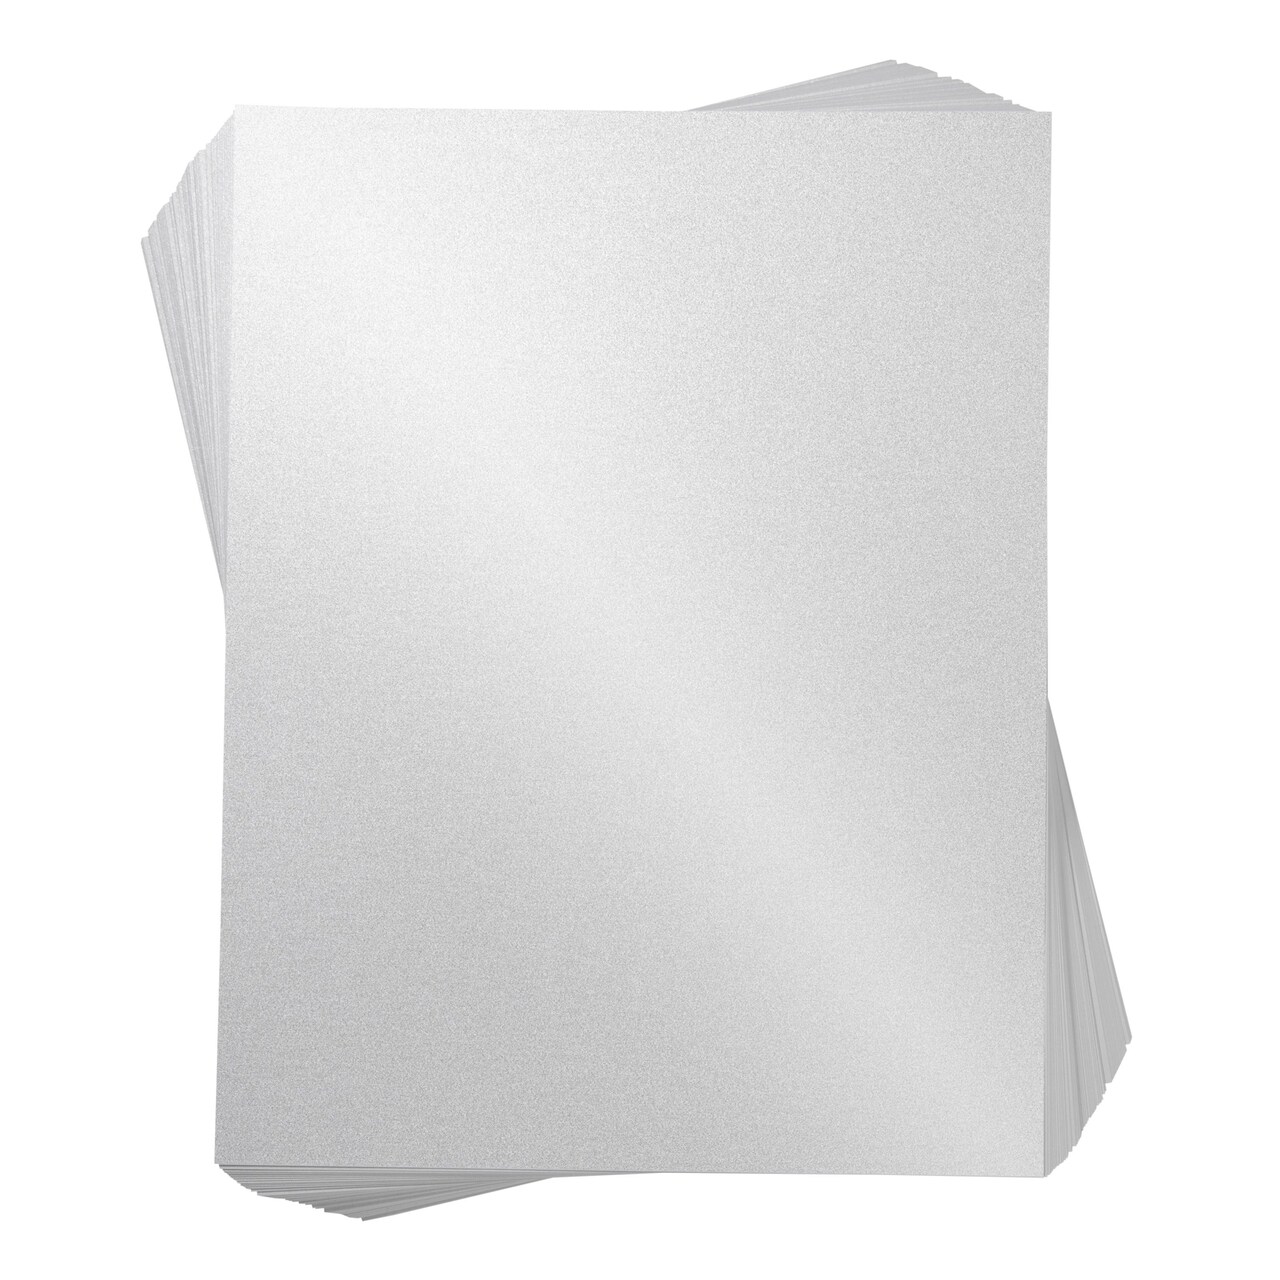 96 Sheets Pearl White Shimmer Cardstock, Metallic Paper for Scrapbook &#x26; Crafts, 8.5 x 11 in